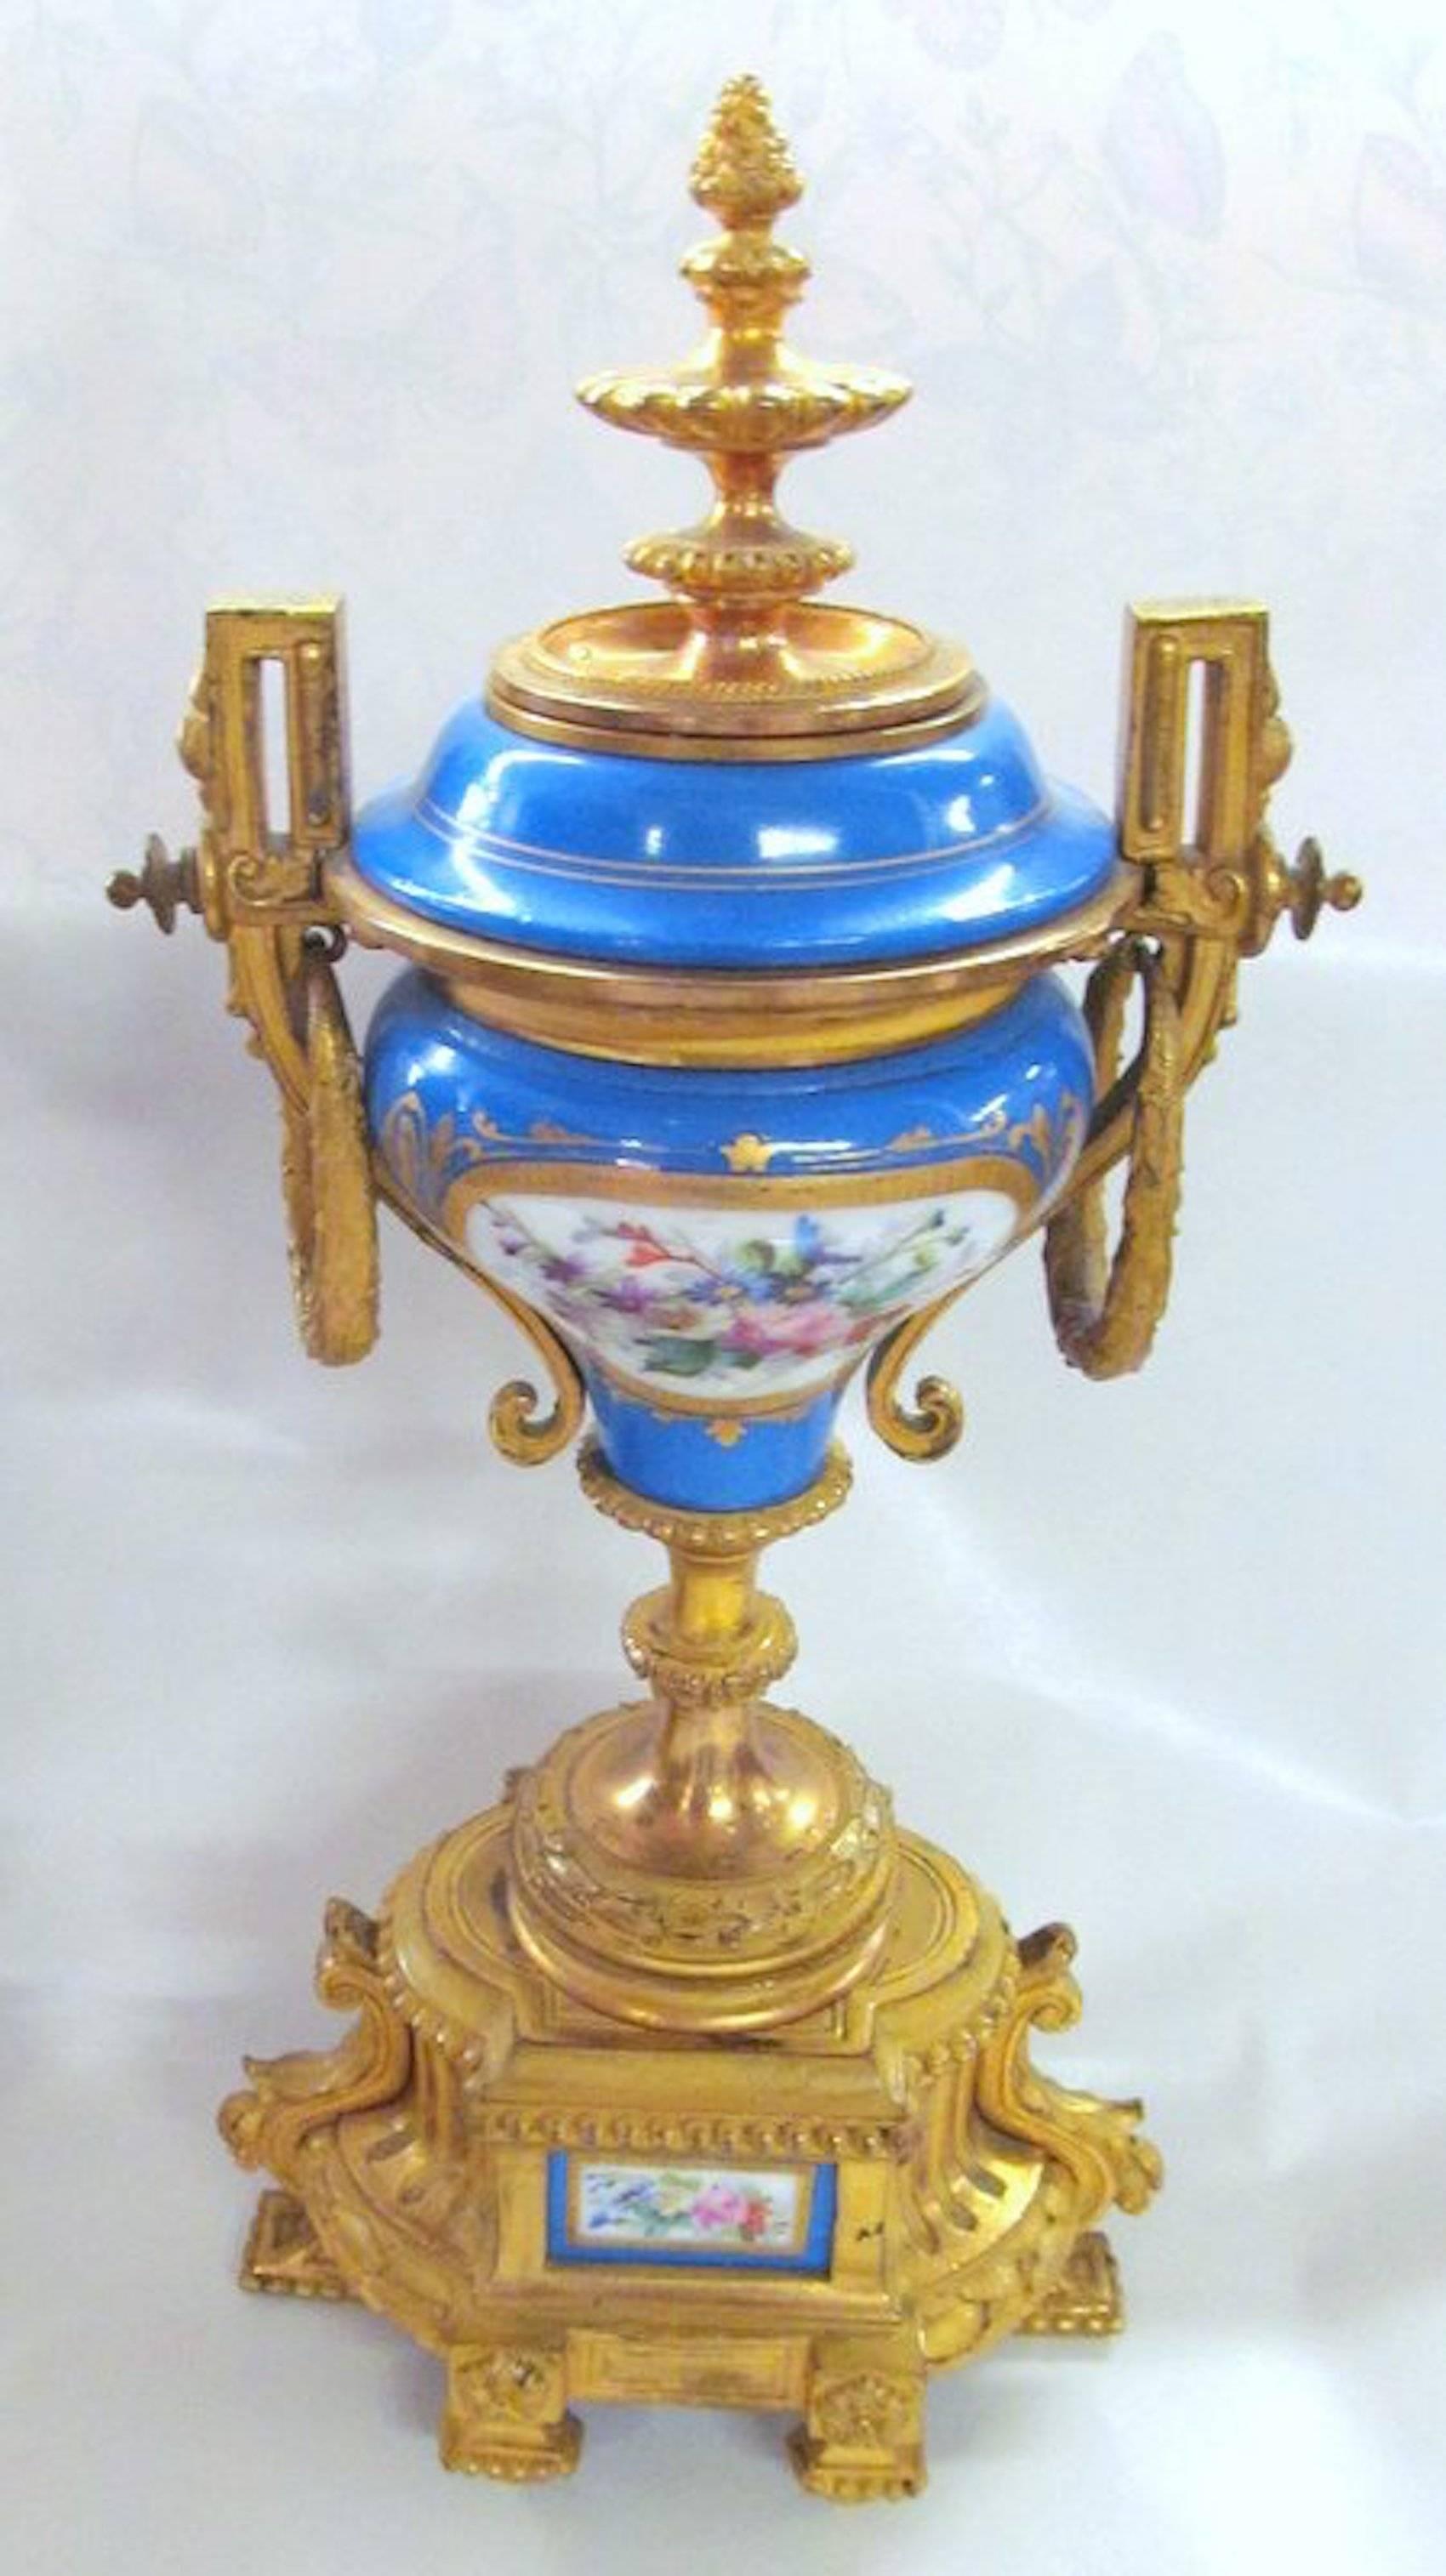 19th Century Pair of Antique French Sèvres-style Porcelain and Ormolu Mounted Cassolettes